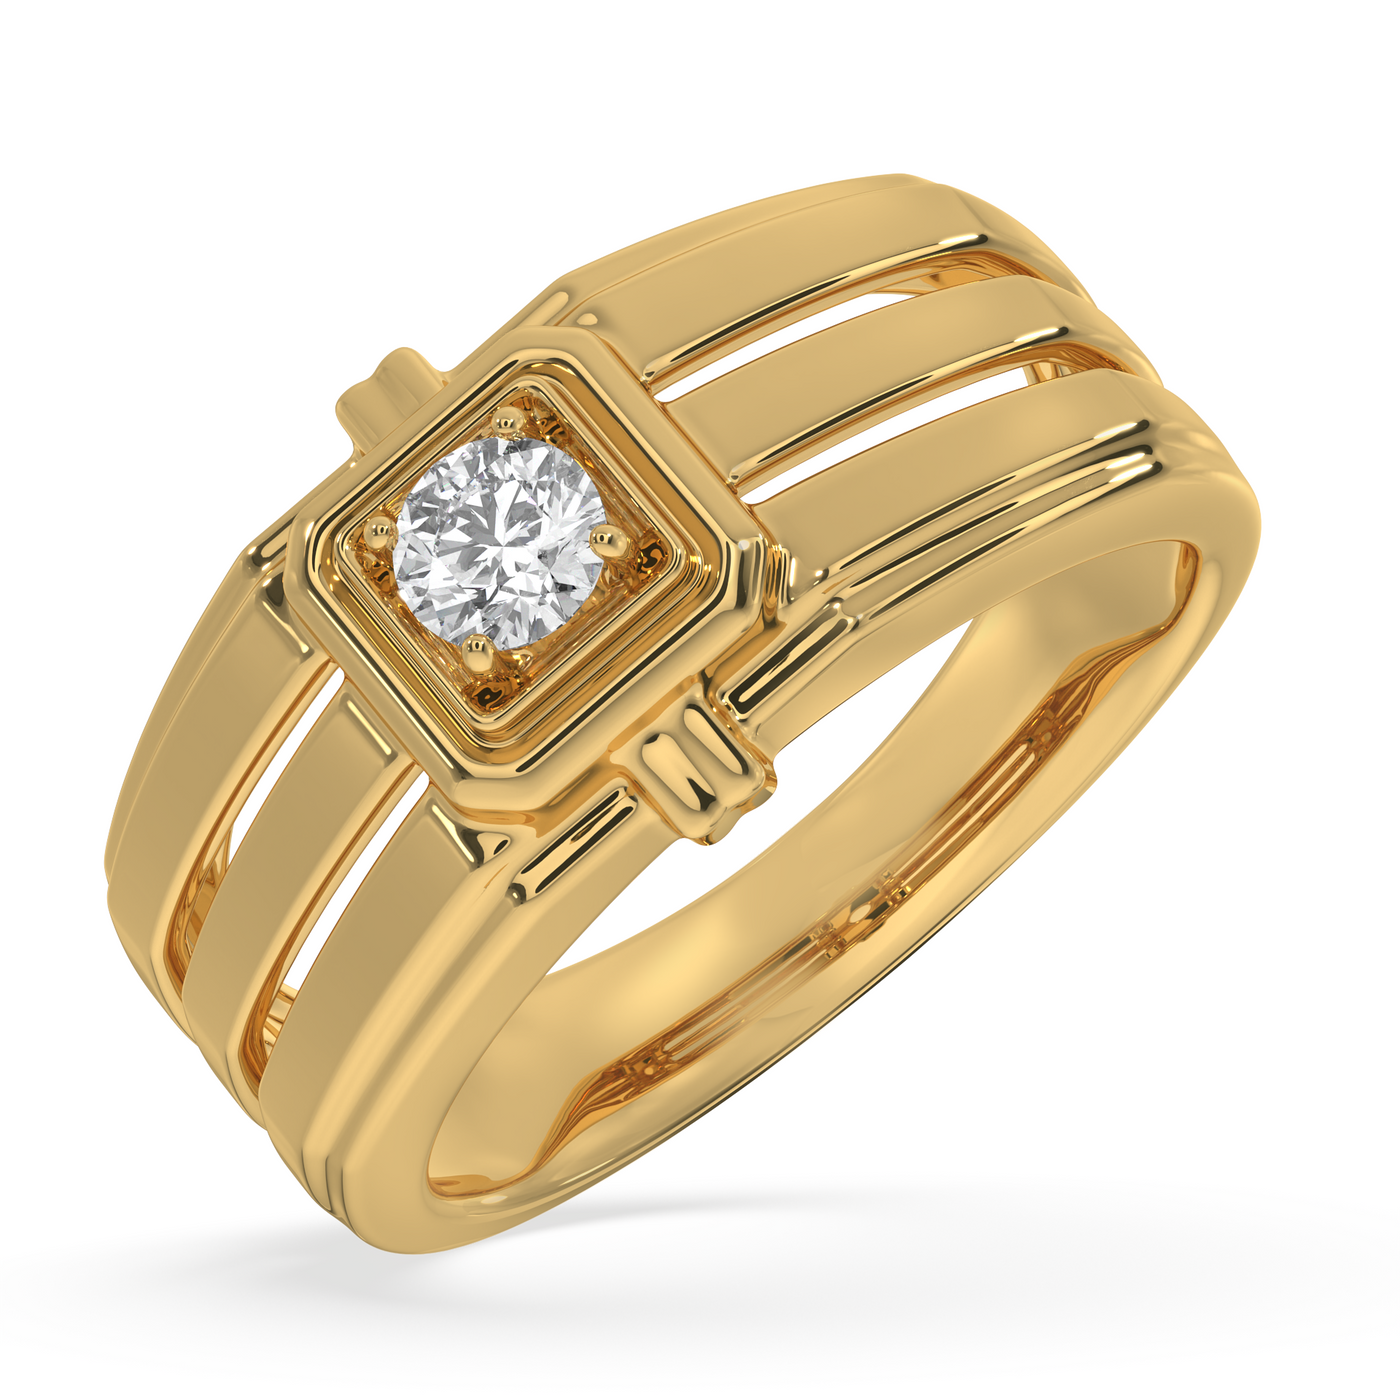 SY Men's Ring in Gold, Elevated Solitaire